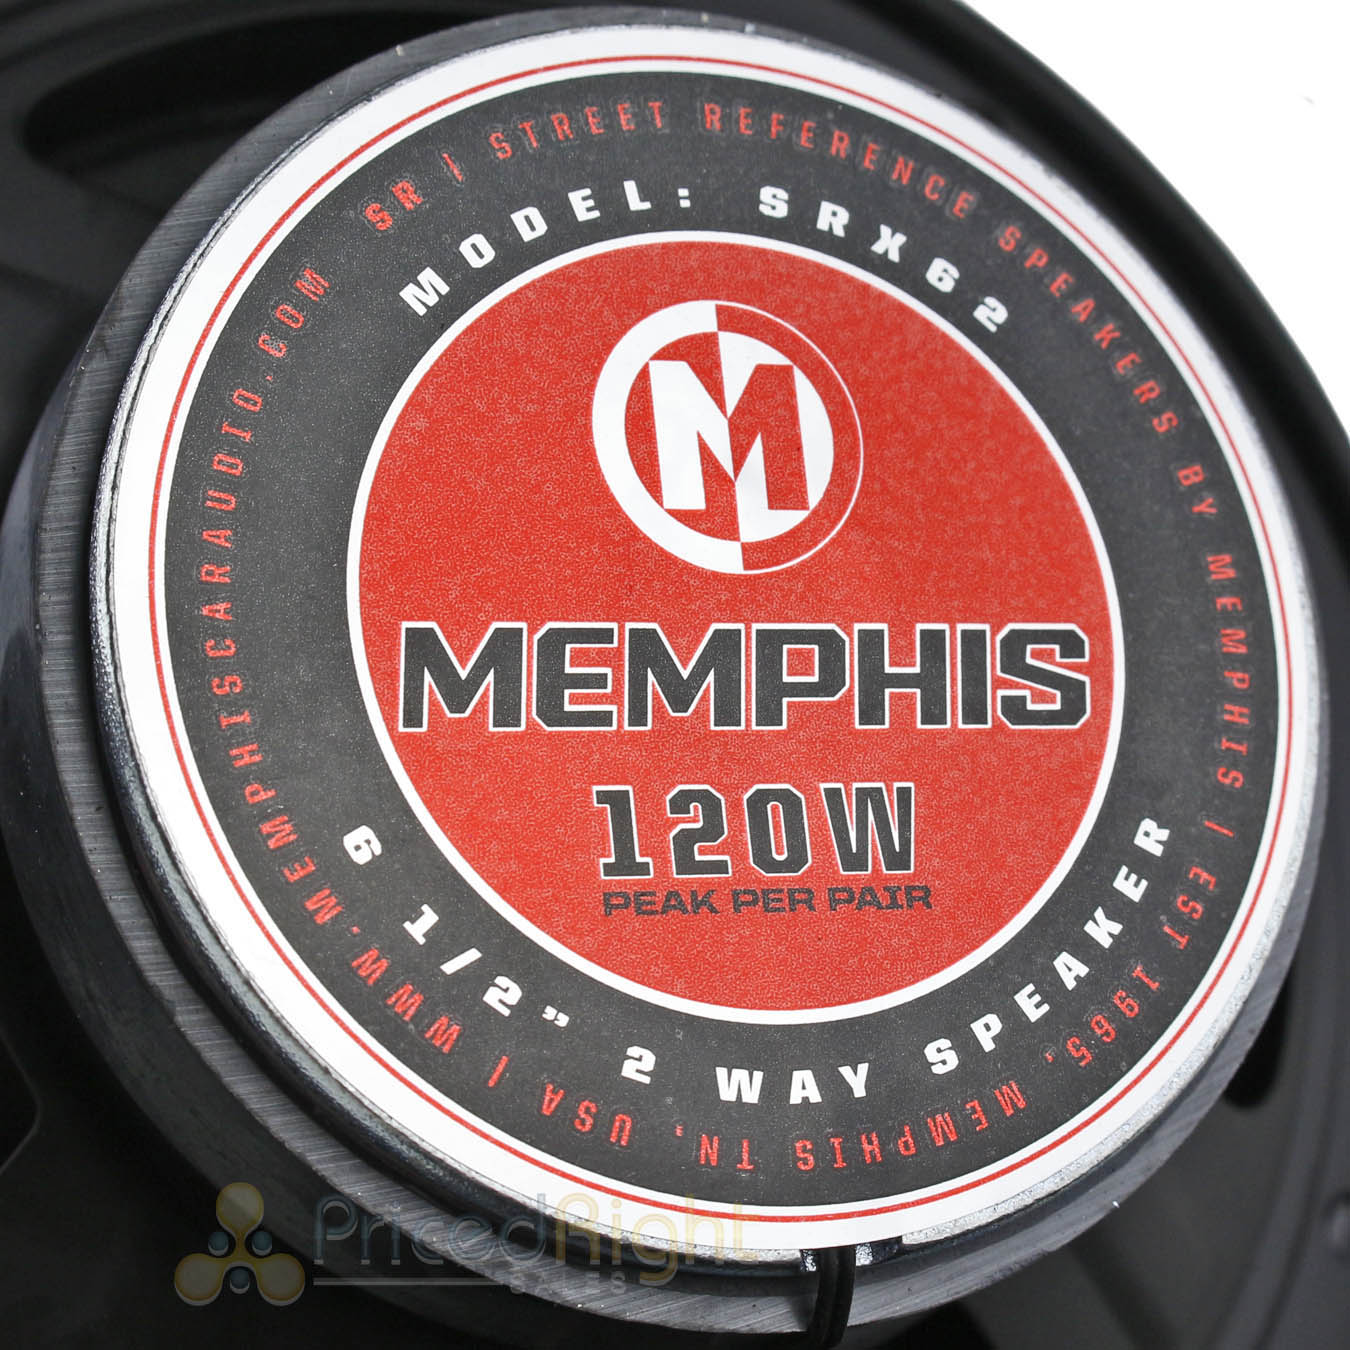 2 Memphis Audio 6.5" 2 Way Coaxial Speakers 60 Watts Max Street Reference SRX62